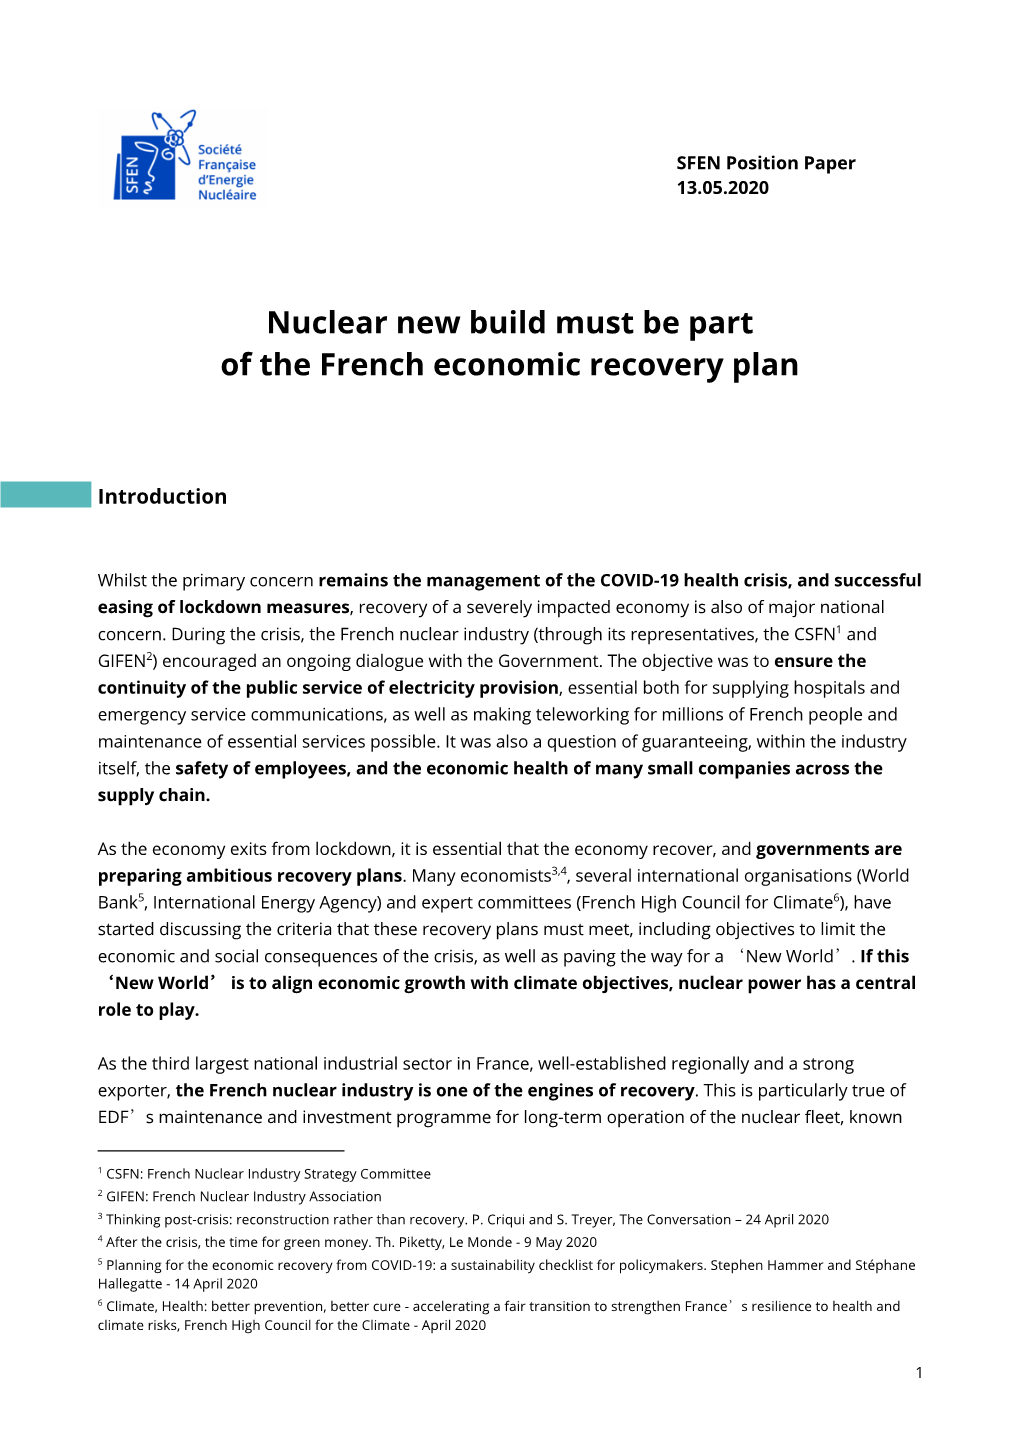 Nuclear New Build Must Be Part of the French Economic Recovery Plan